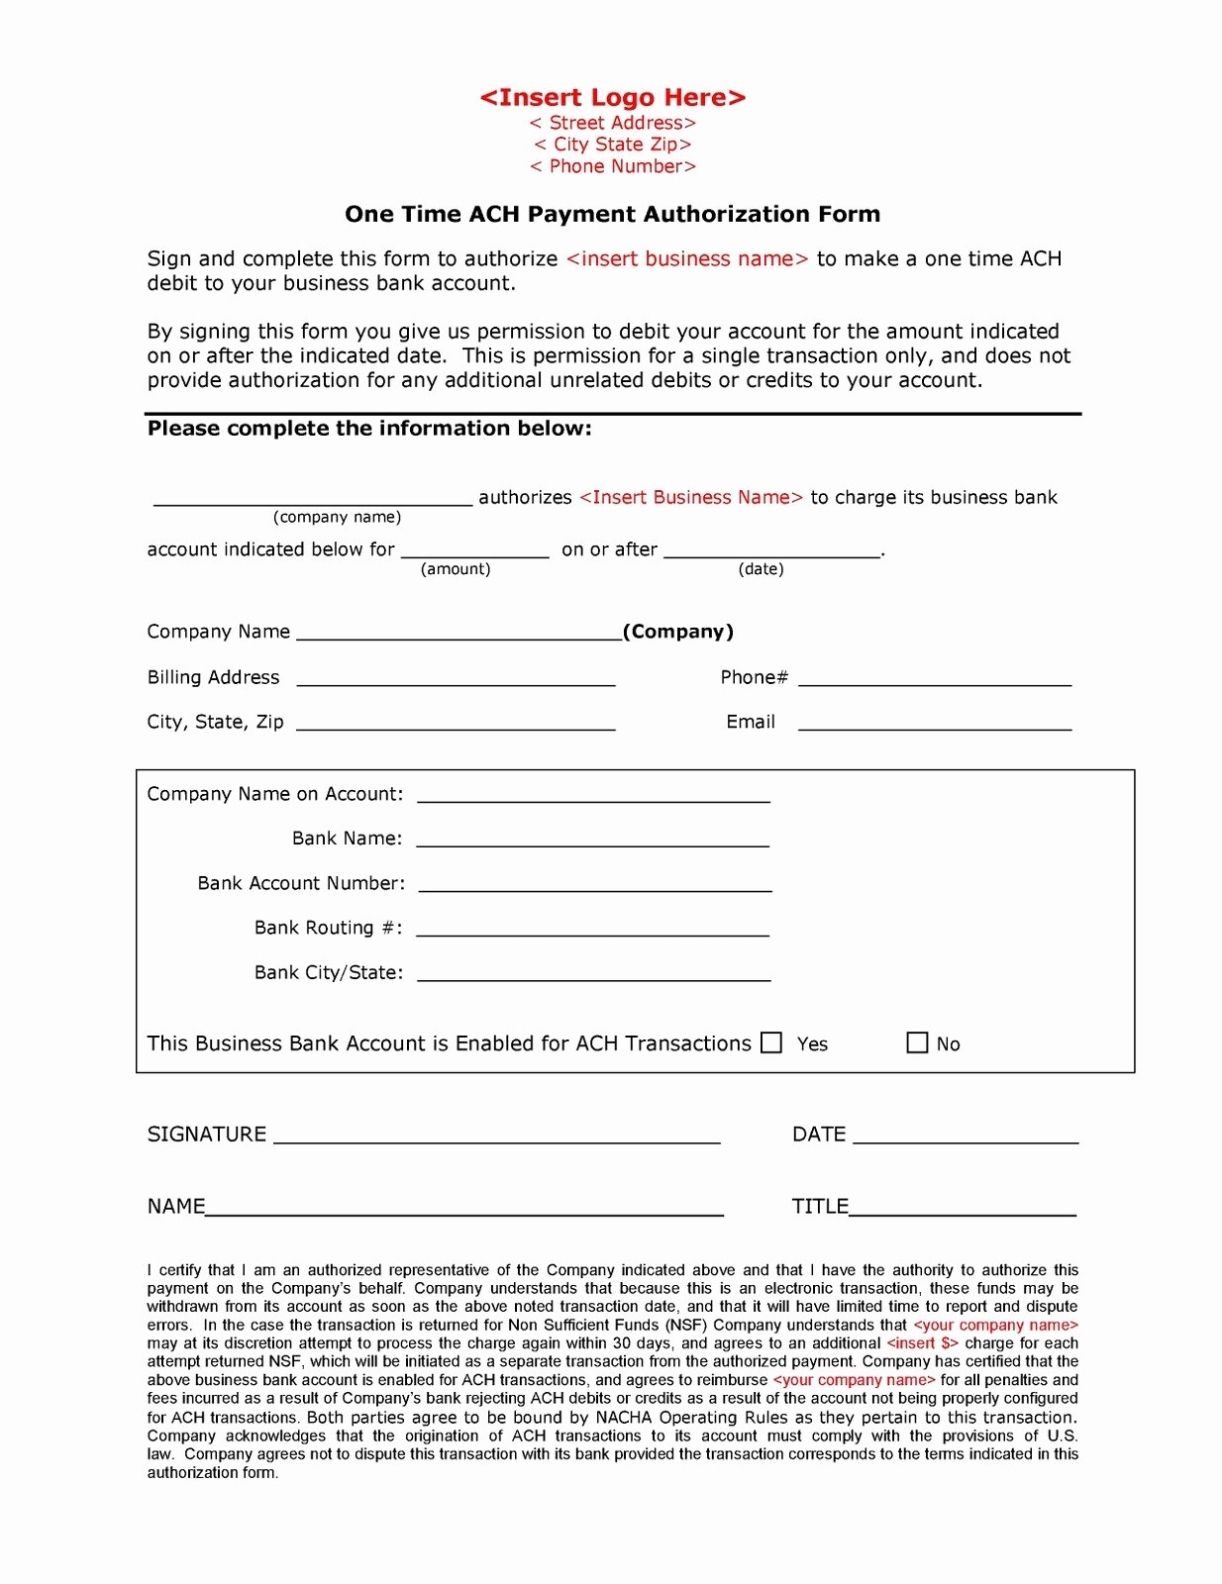 Ach Deposit Authorization Form Template | Shooters Journal In Profit Participation Loan Agreement Template